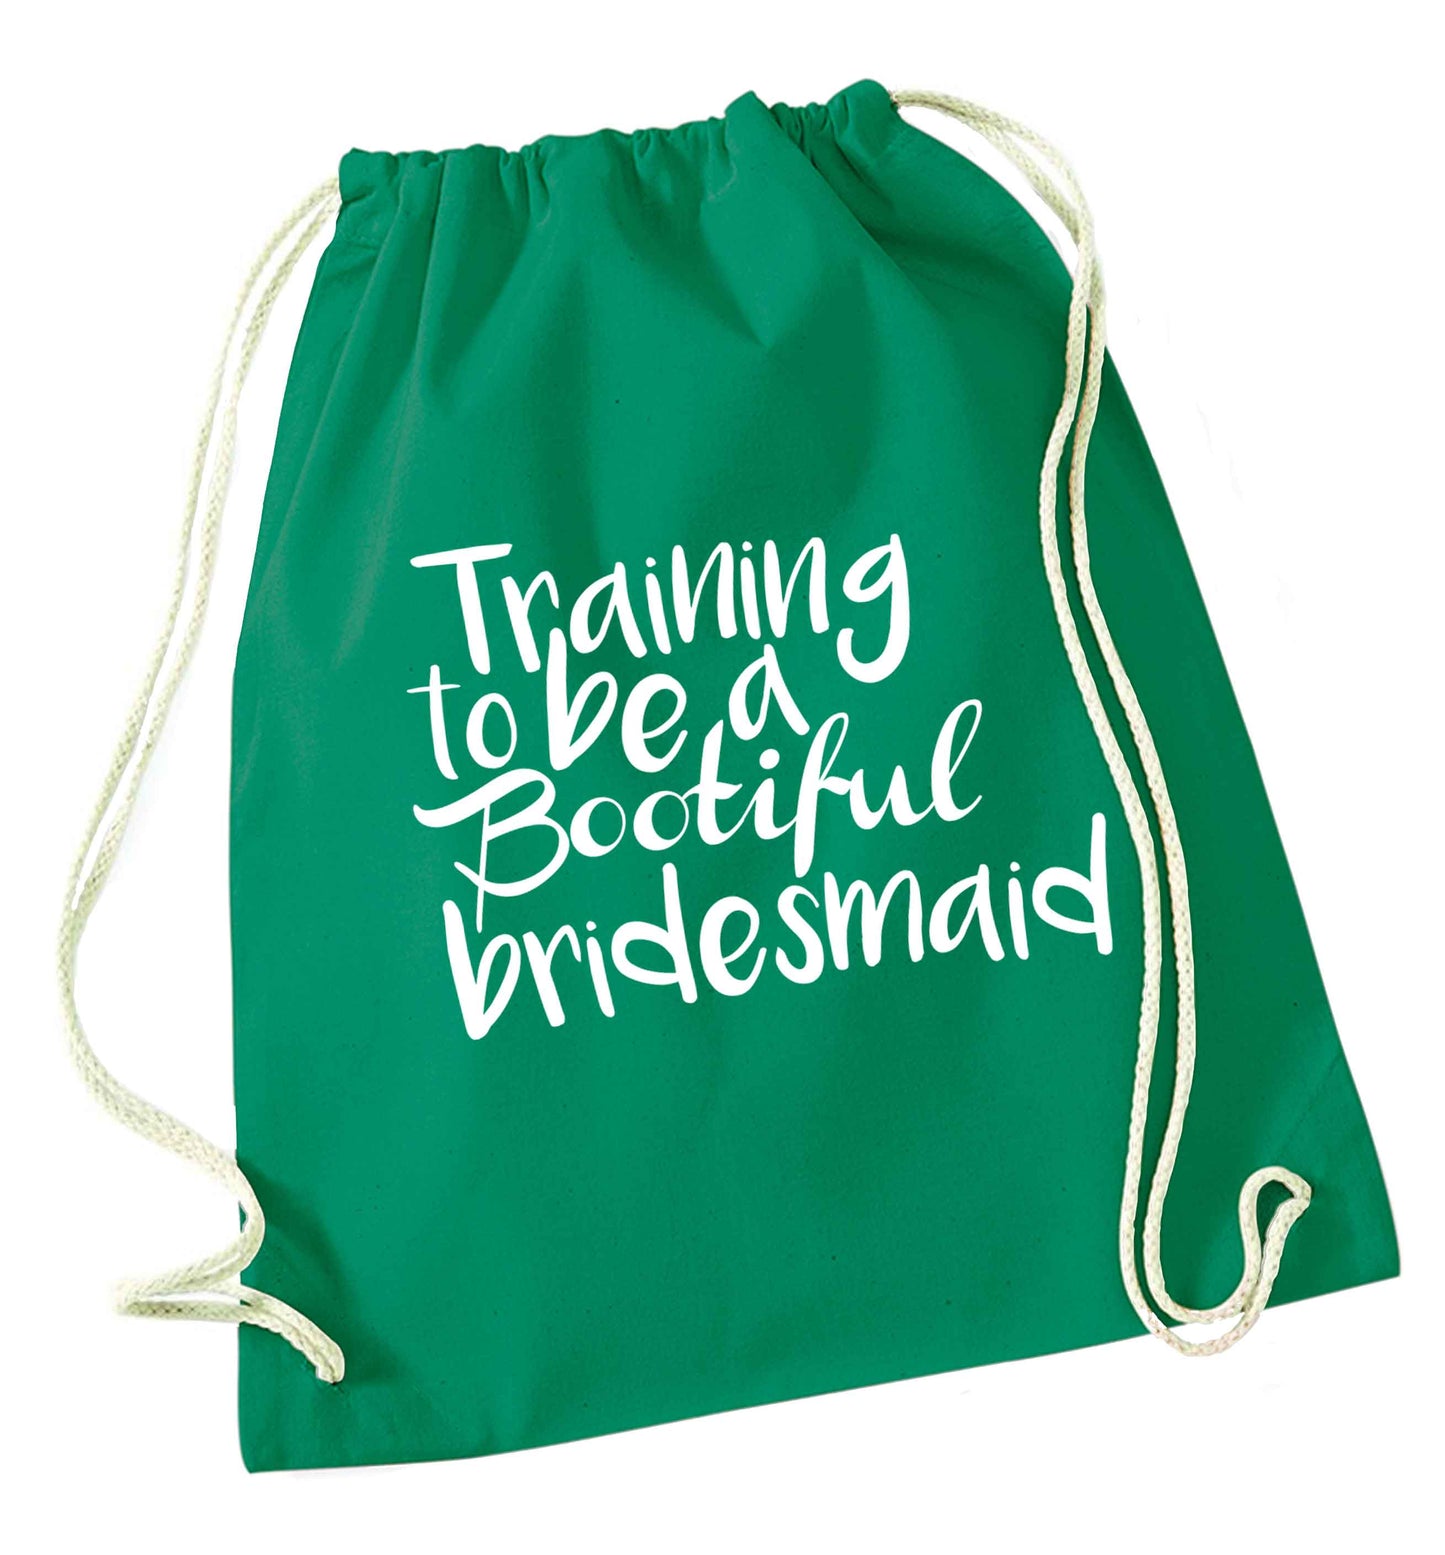 Get motivated and get fit for your big day! Our workout quotes and designs will get you ready to sweat! Perfect for any bride, groom or bridesmaid to be!  green drawstring bag